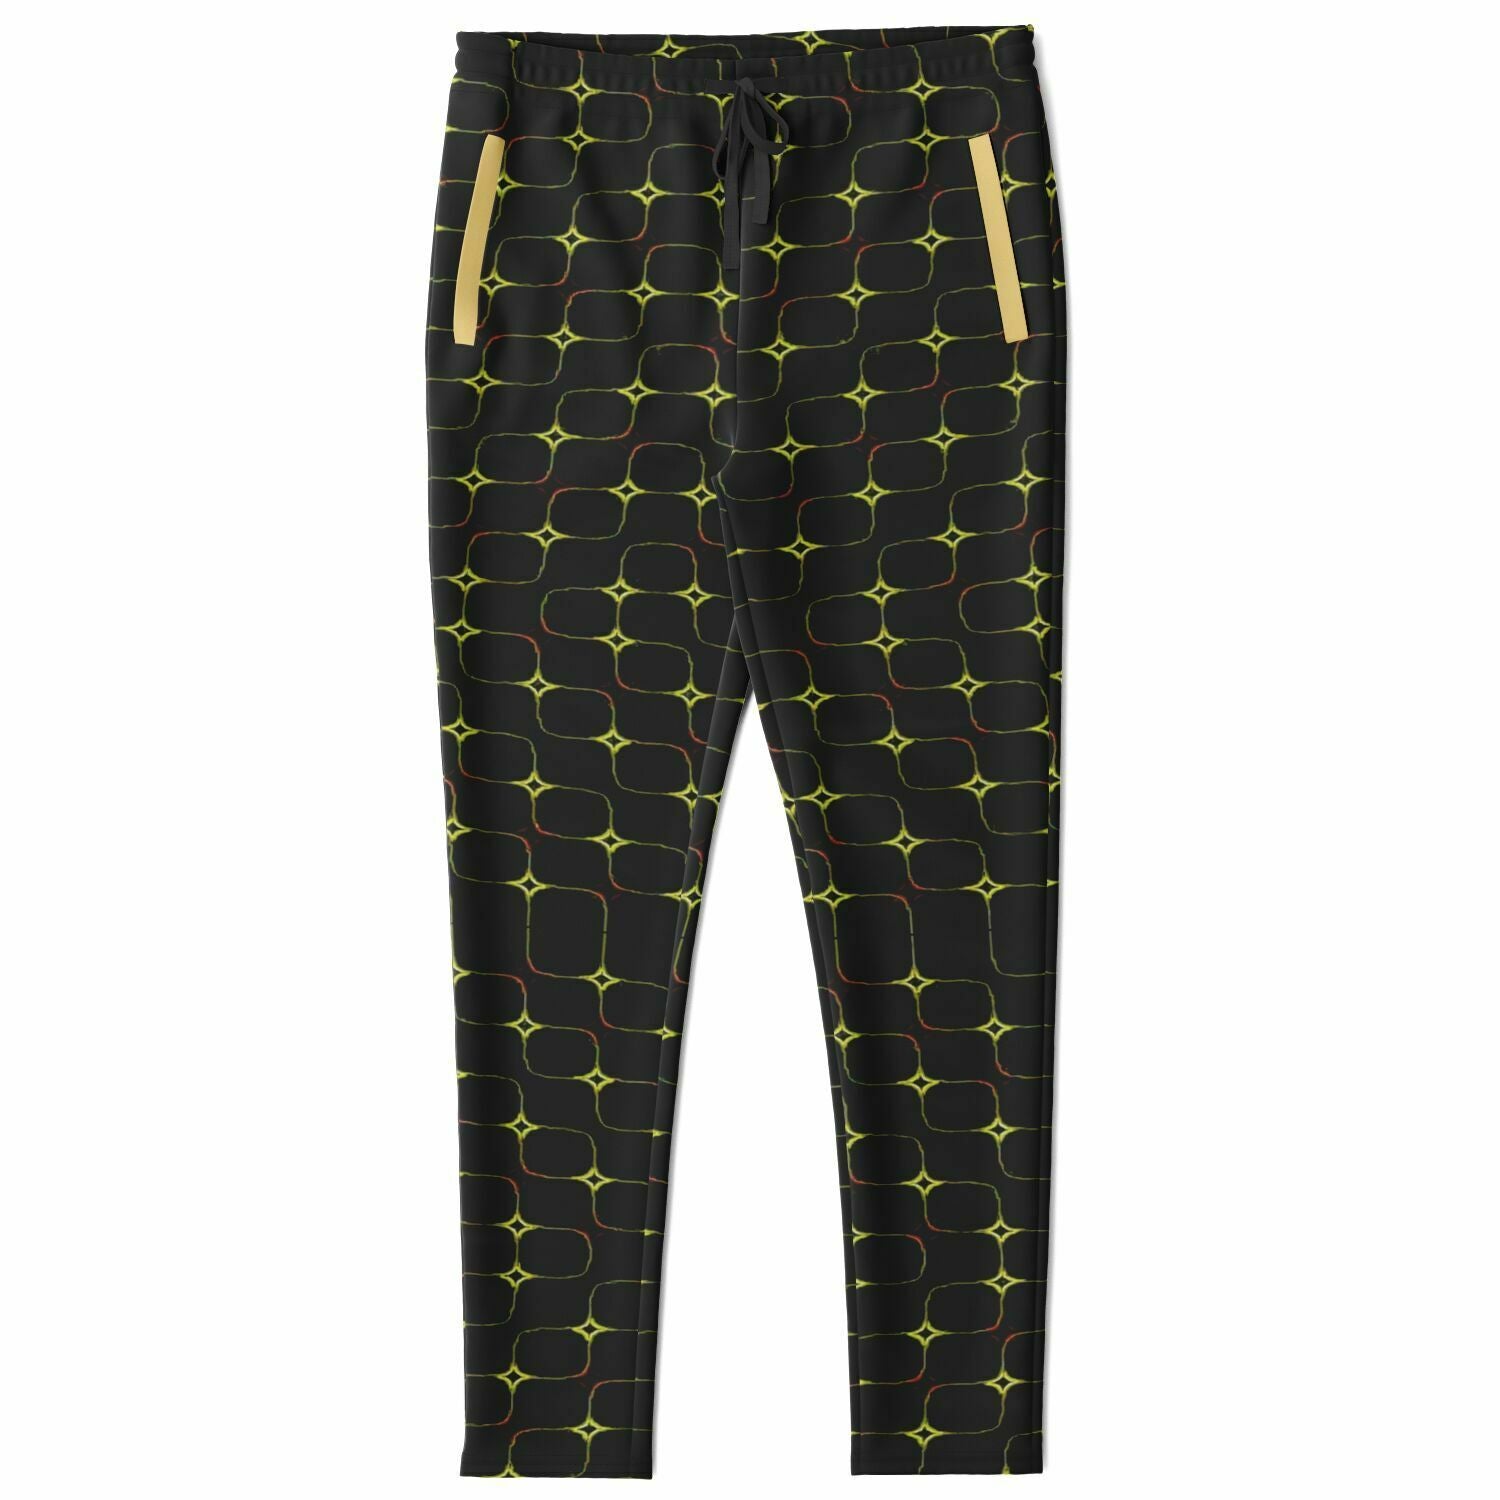 STAY IN YOUR LANE 02-01 Designer Unisex Track Pants